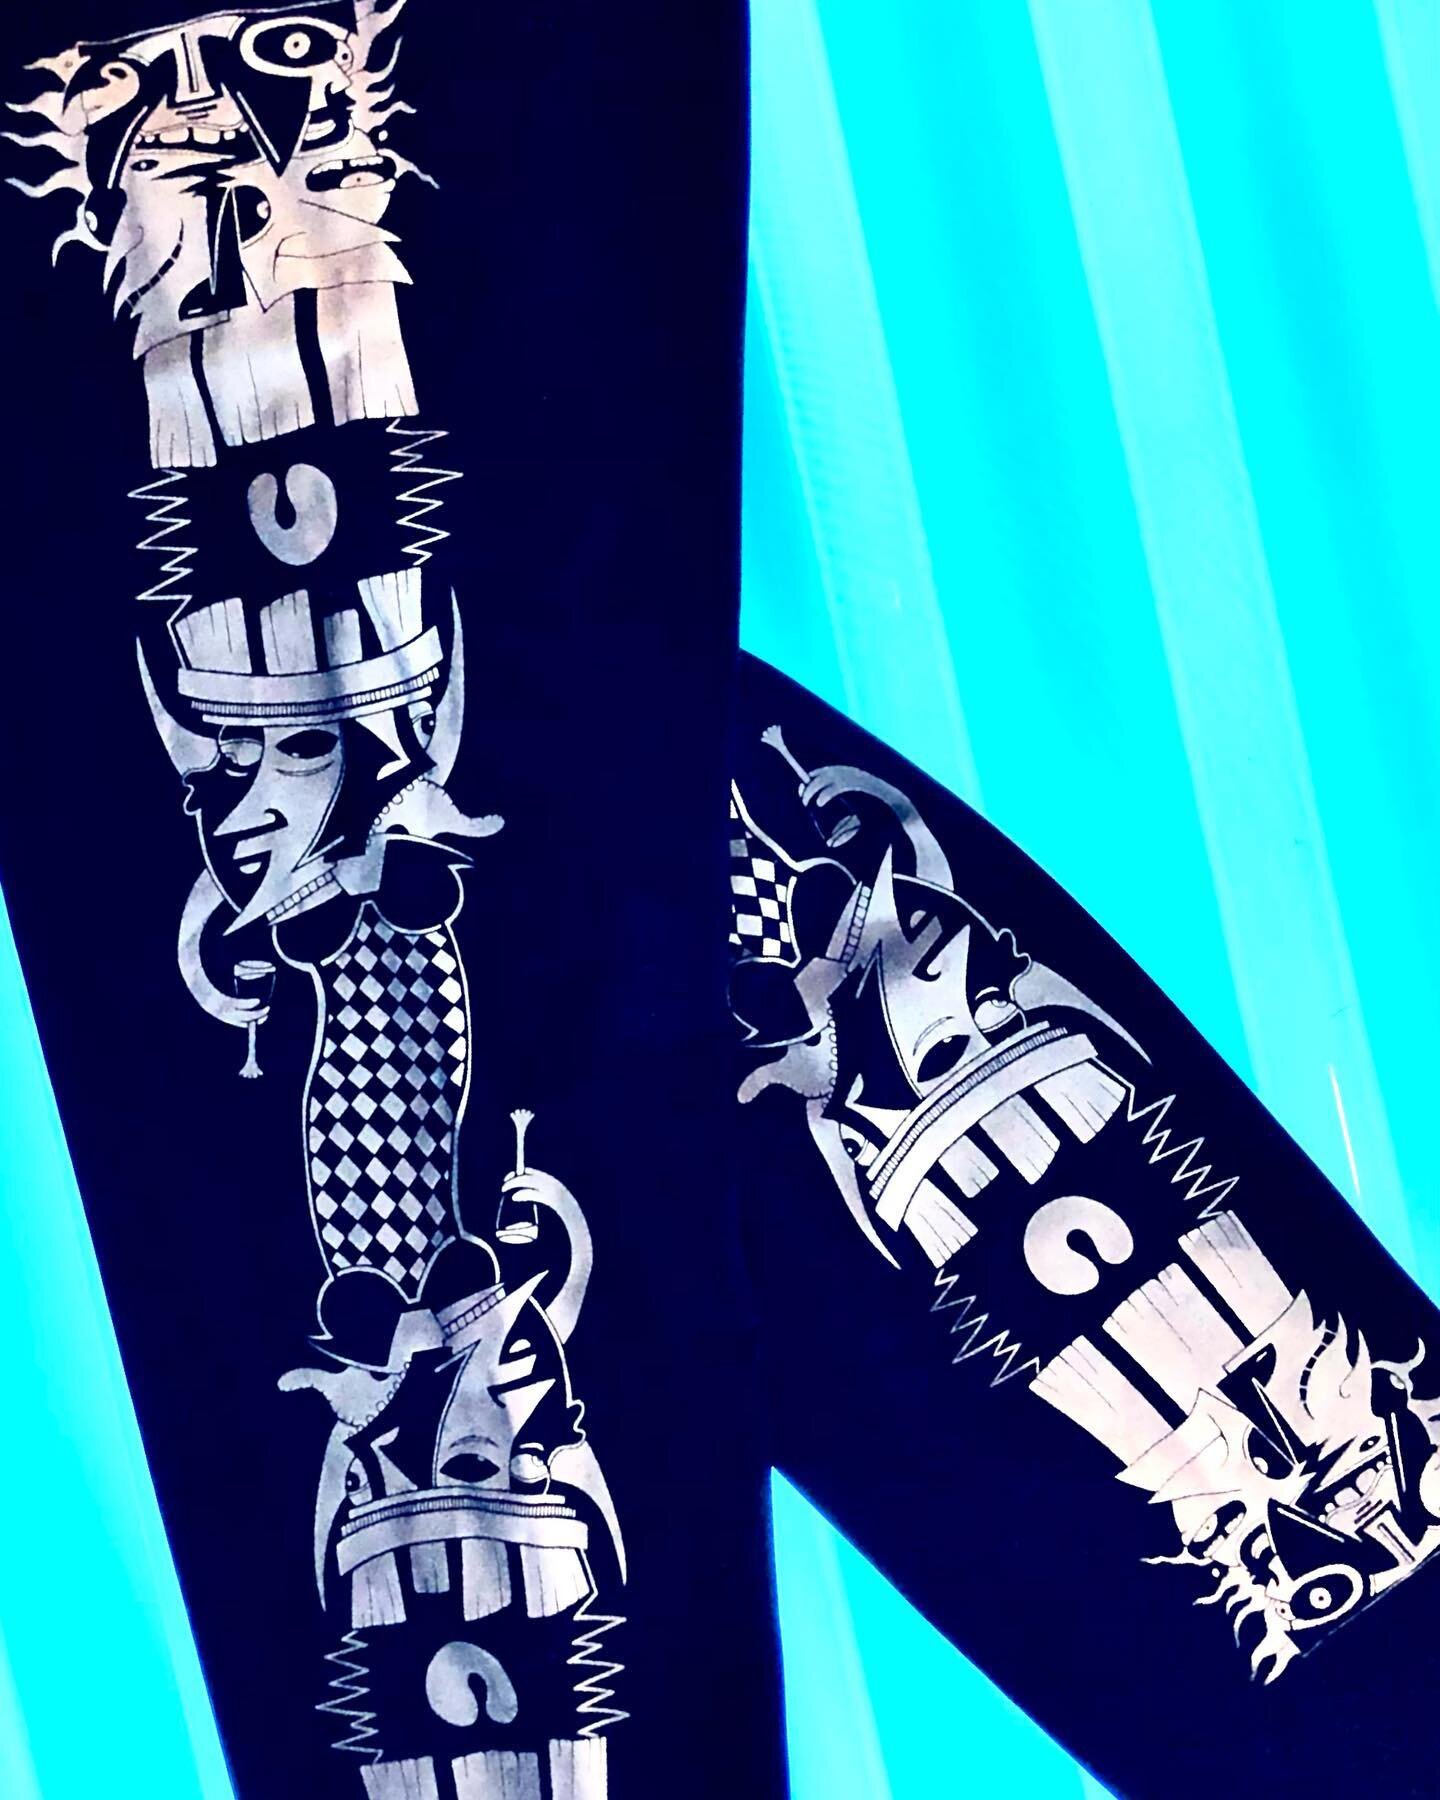 A shout out to @eric_hagan_art and the leggings we collaborated on! Check him out, see all of his artwork, and pick up a sweet set of leggings!